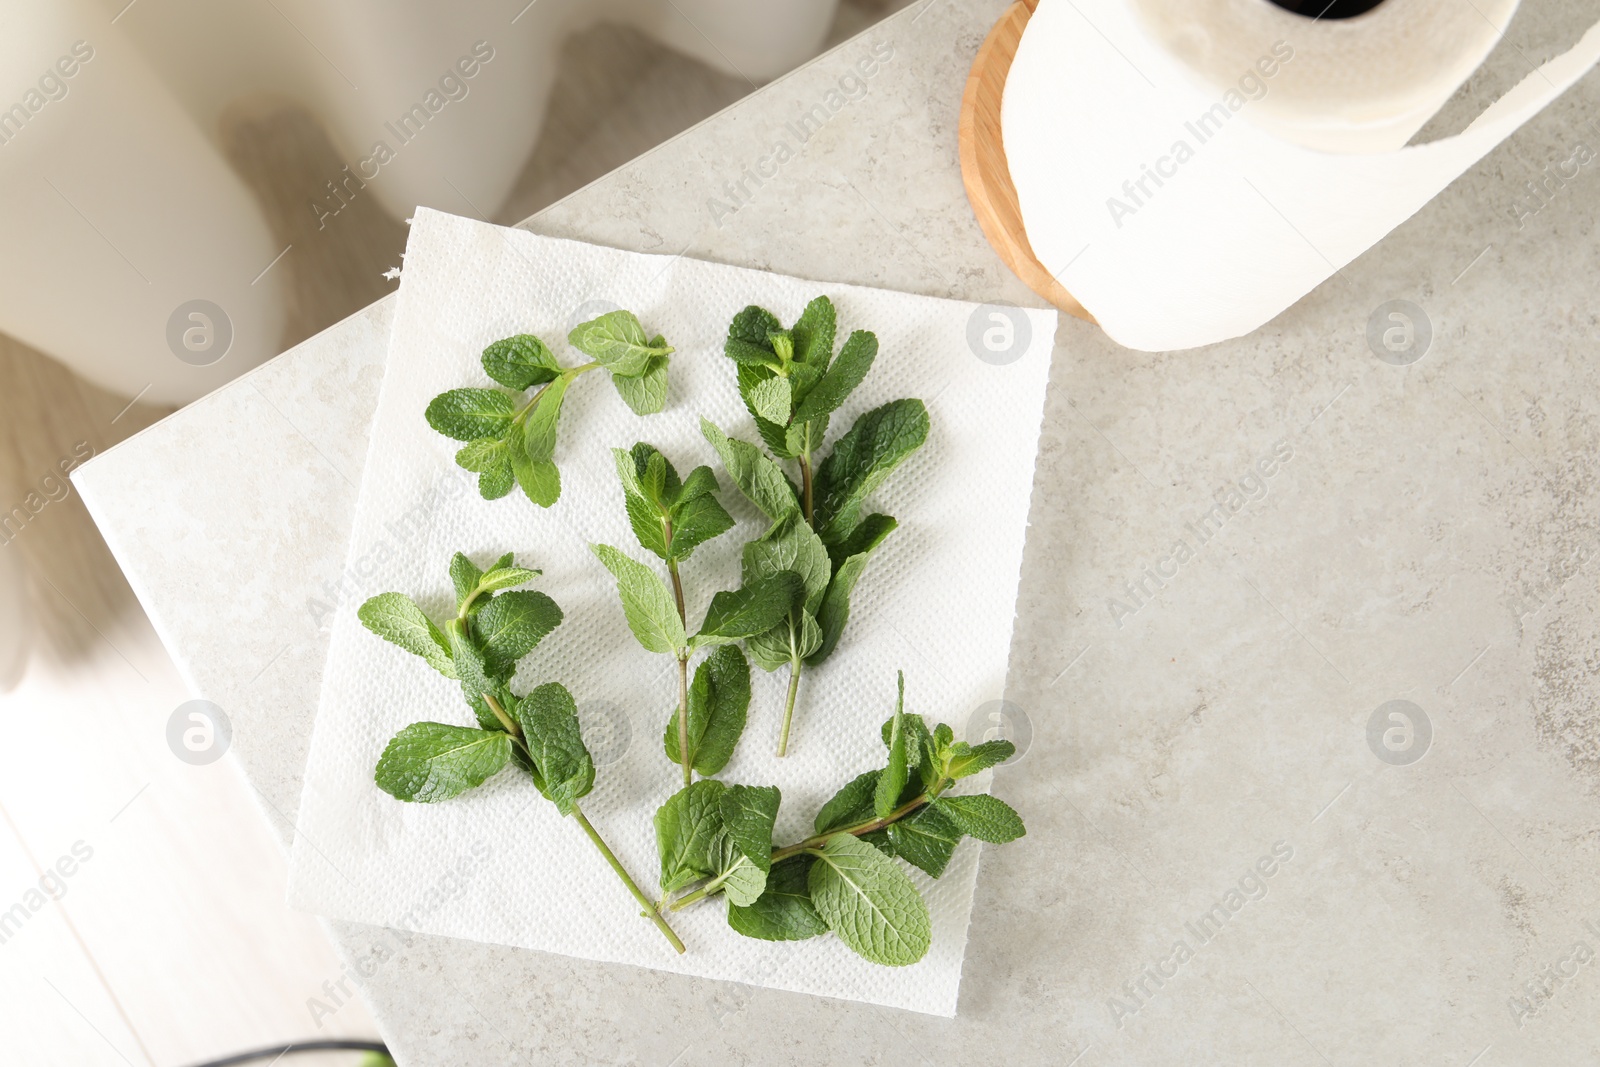 Photo of Mint drying on paper towel on light table indoors, top view